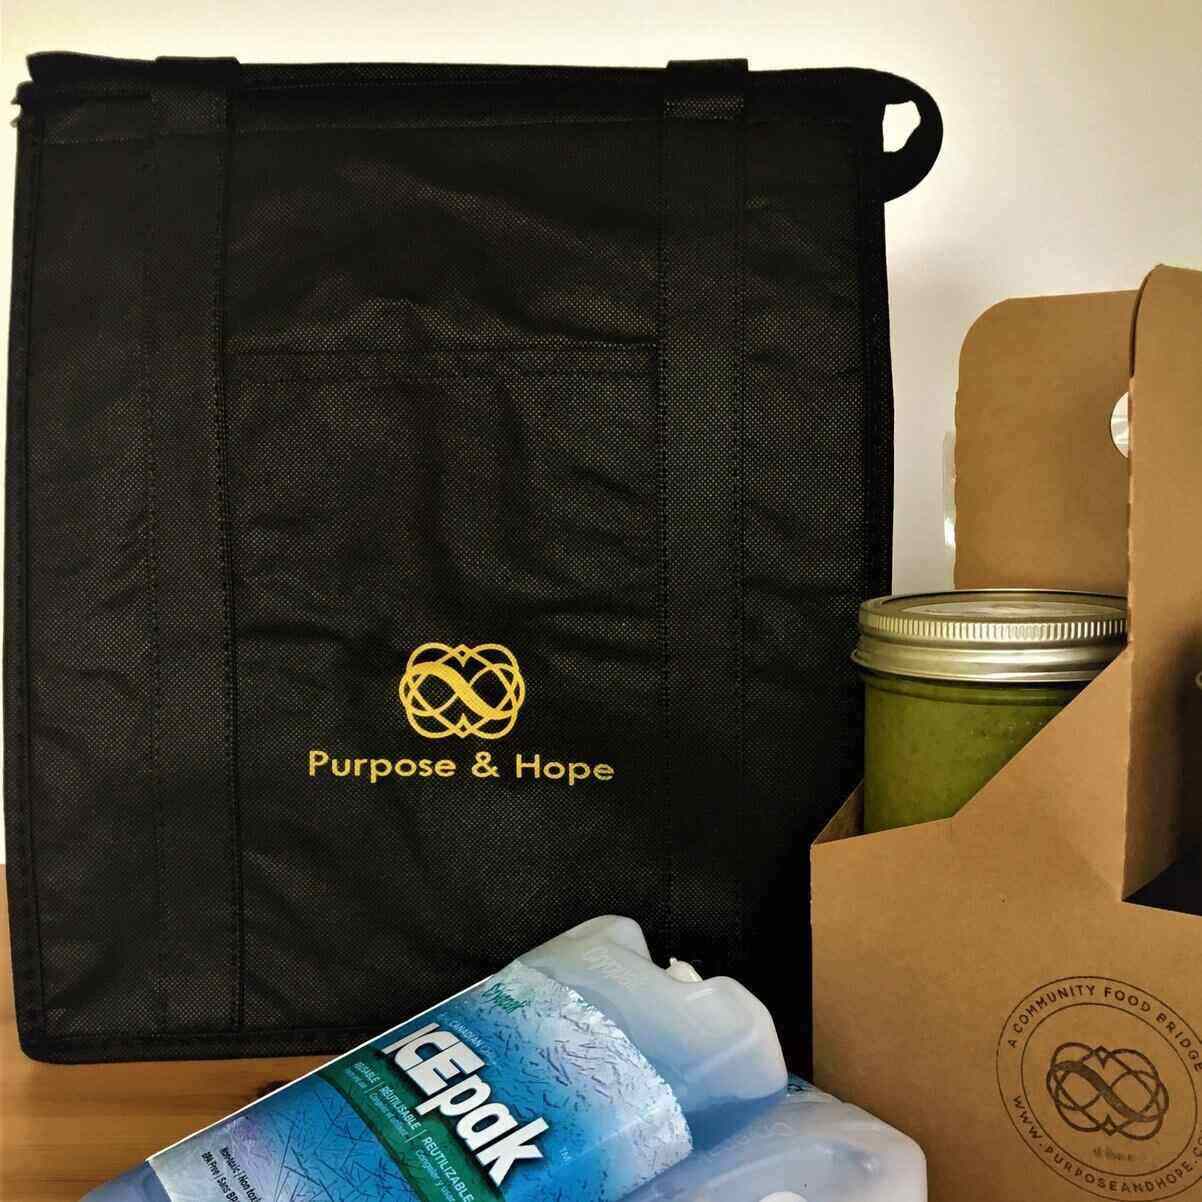 A black tote bag with the Purpose and Hope logo on it sits behind two ice packs and a cardboard drink holder holding a jar of green soup. 